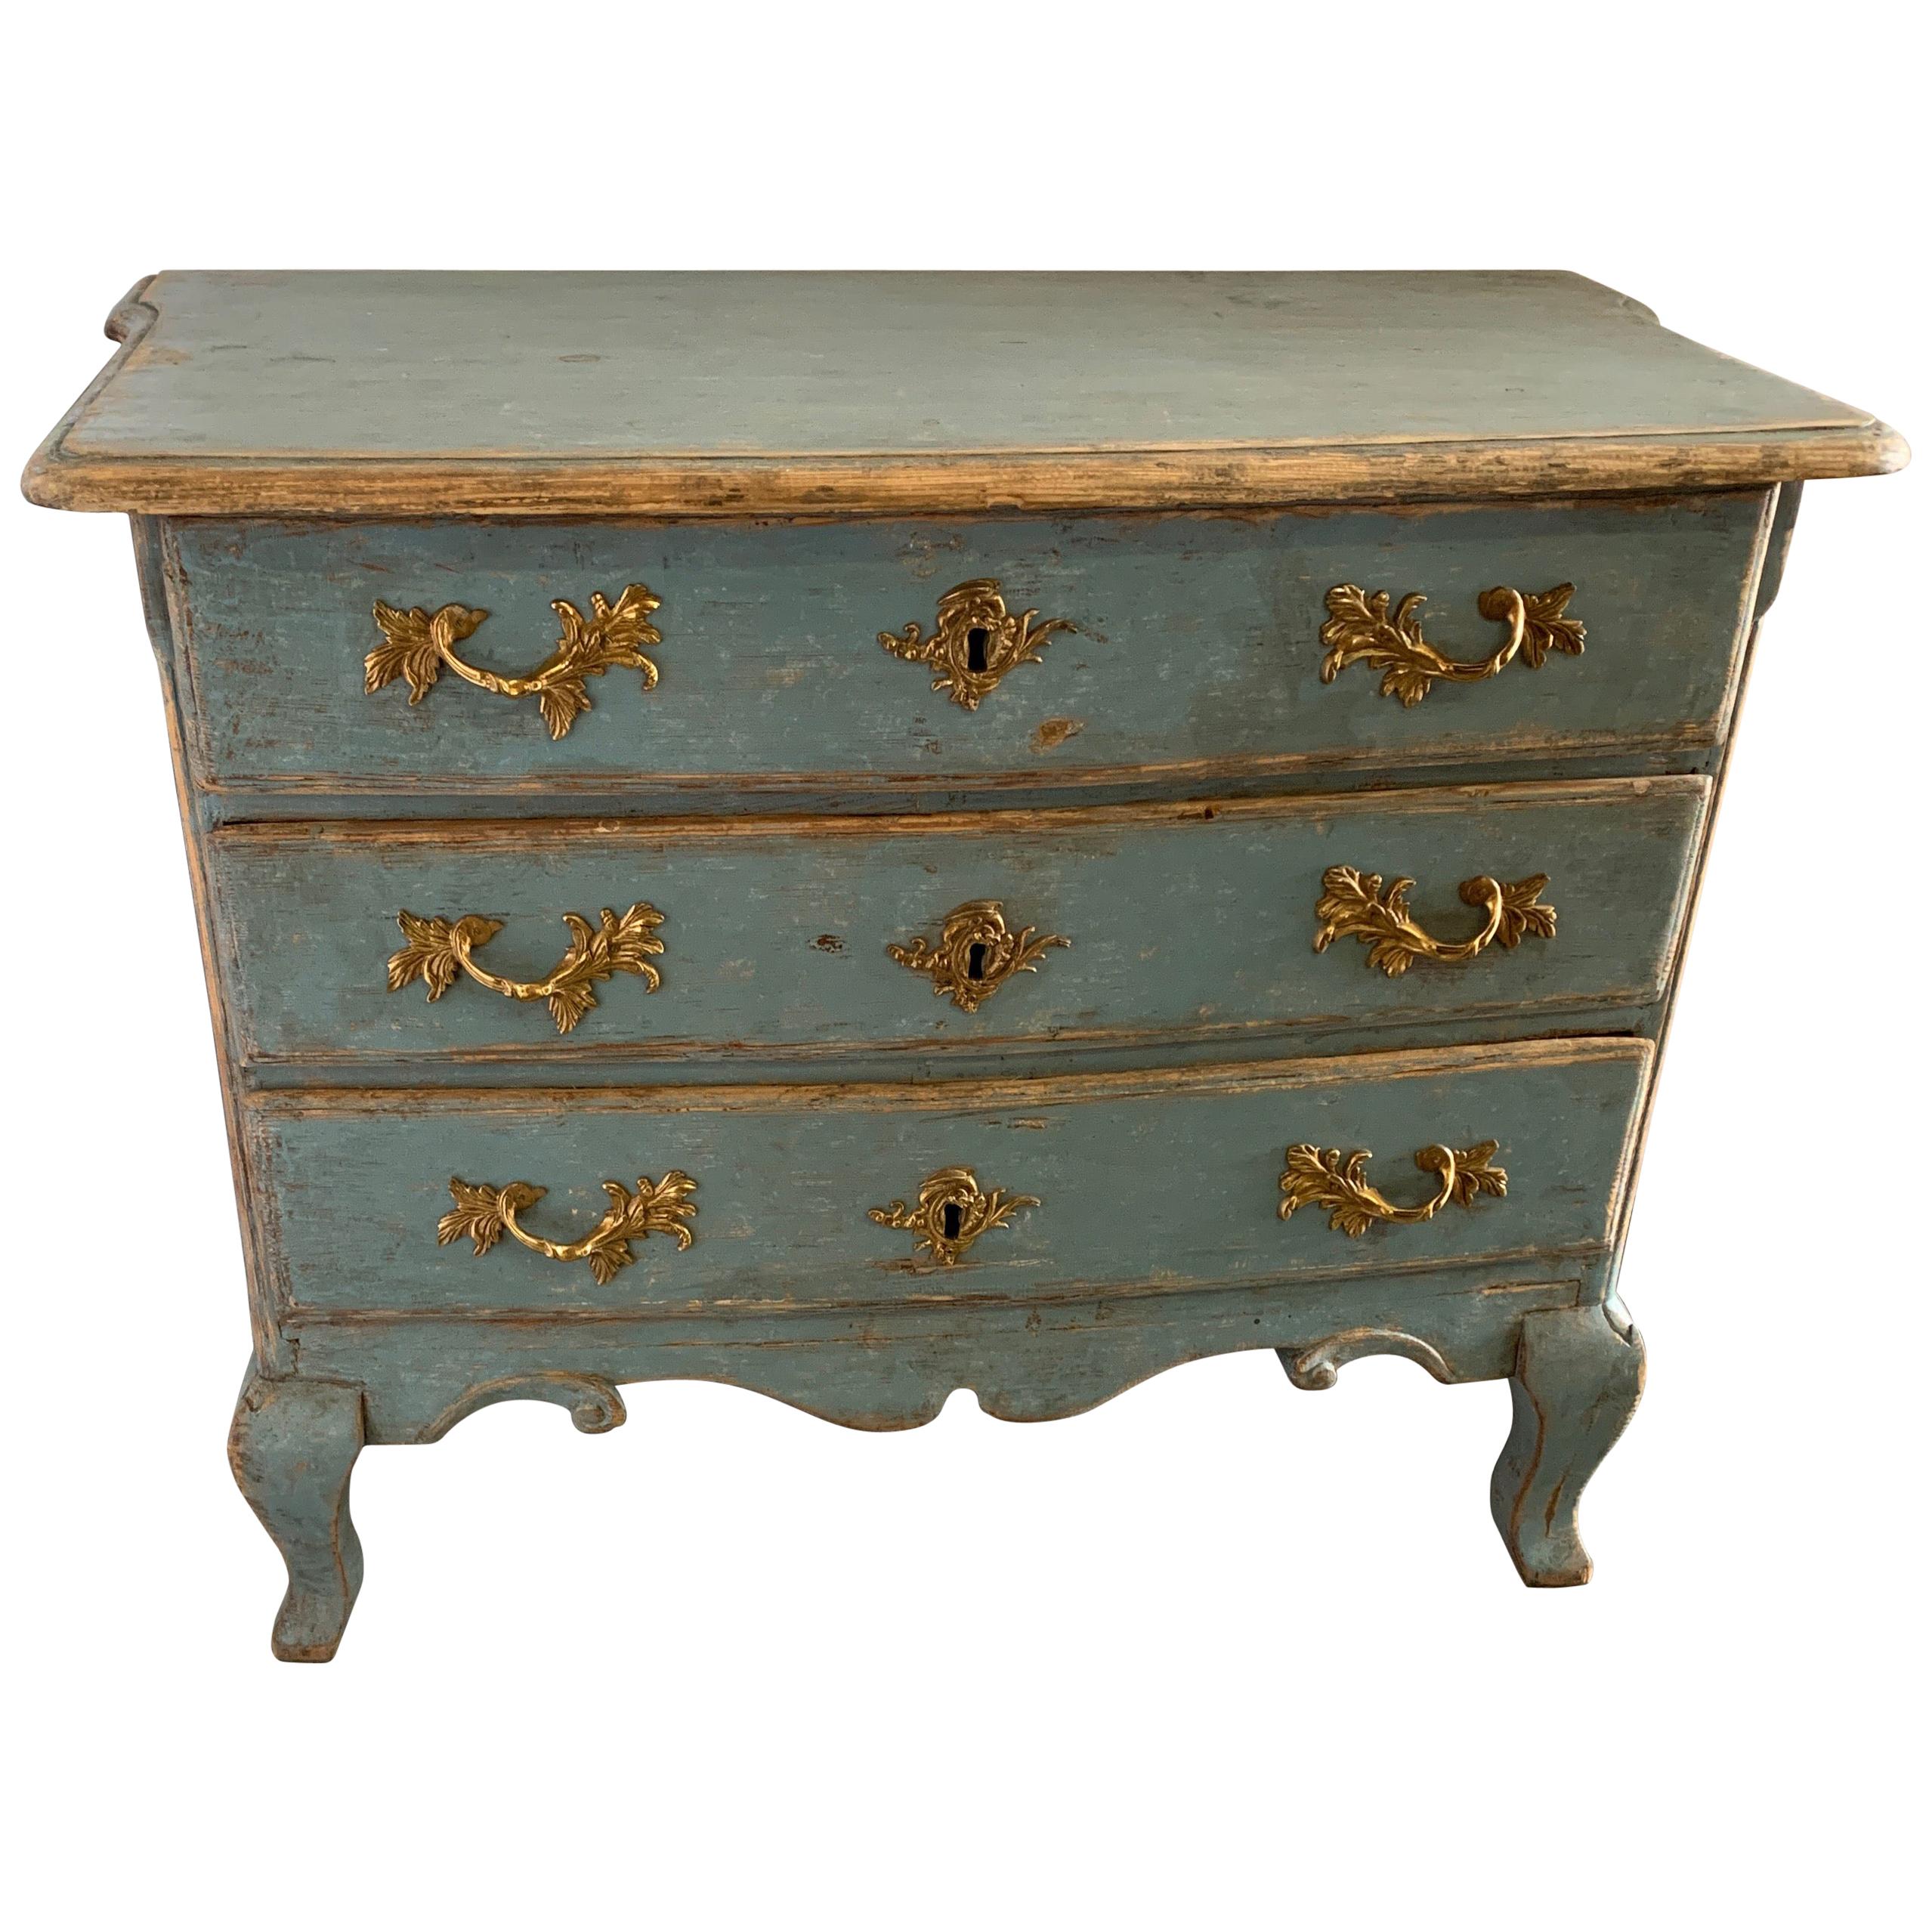 19th Century Swedish Unusual Small Painted Chest